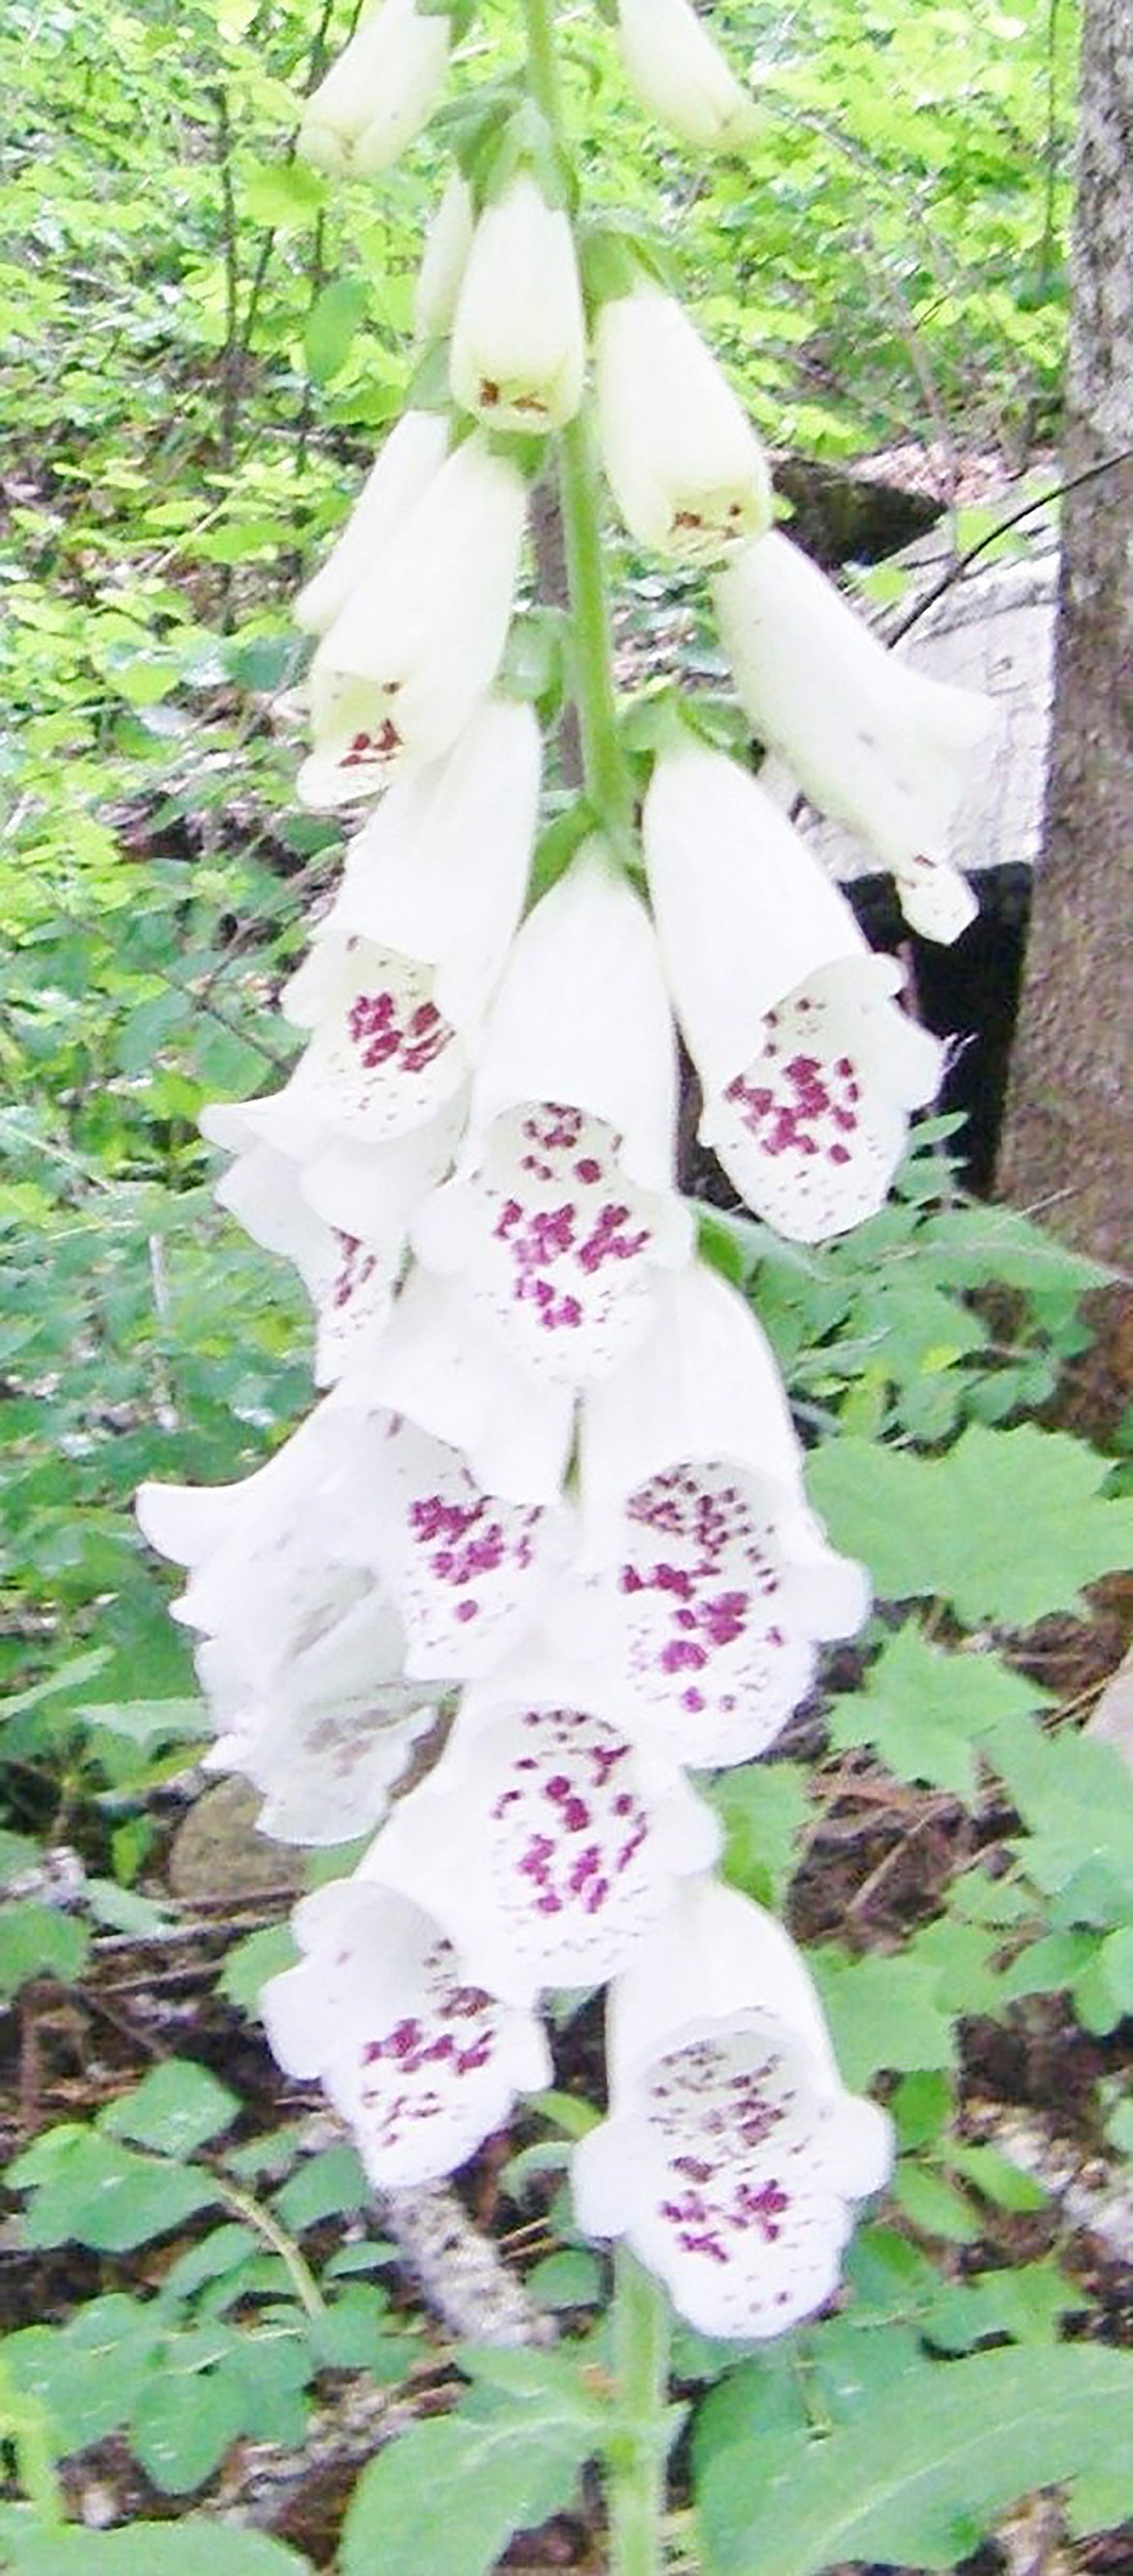 Lovely native foxglove (digitalis) in “resurrected” garden is poisonous to humans as well as deer.